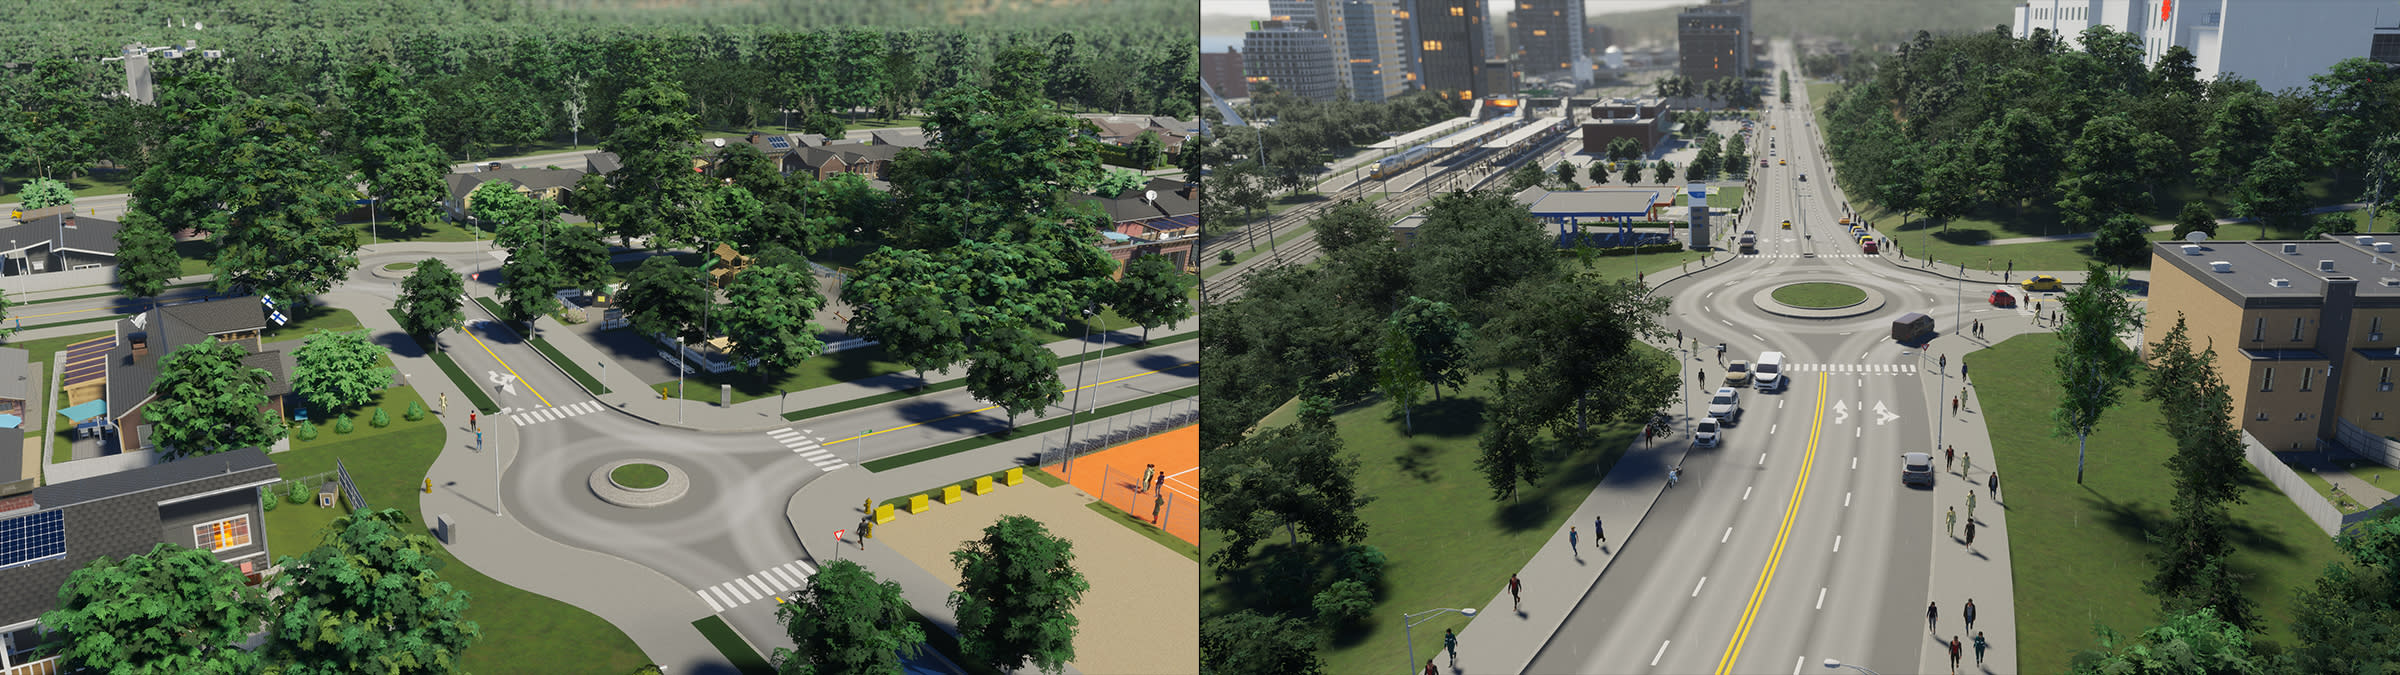 cities-skylines-ii-road-tools-roundabouts